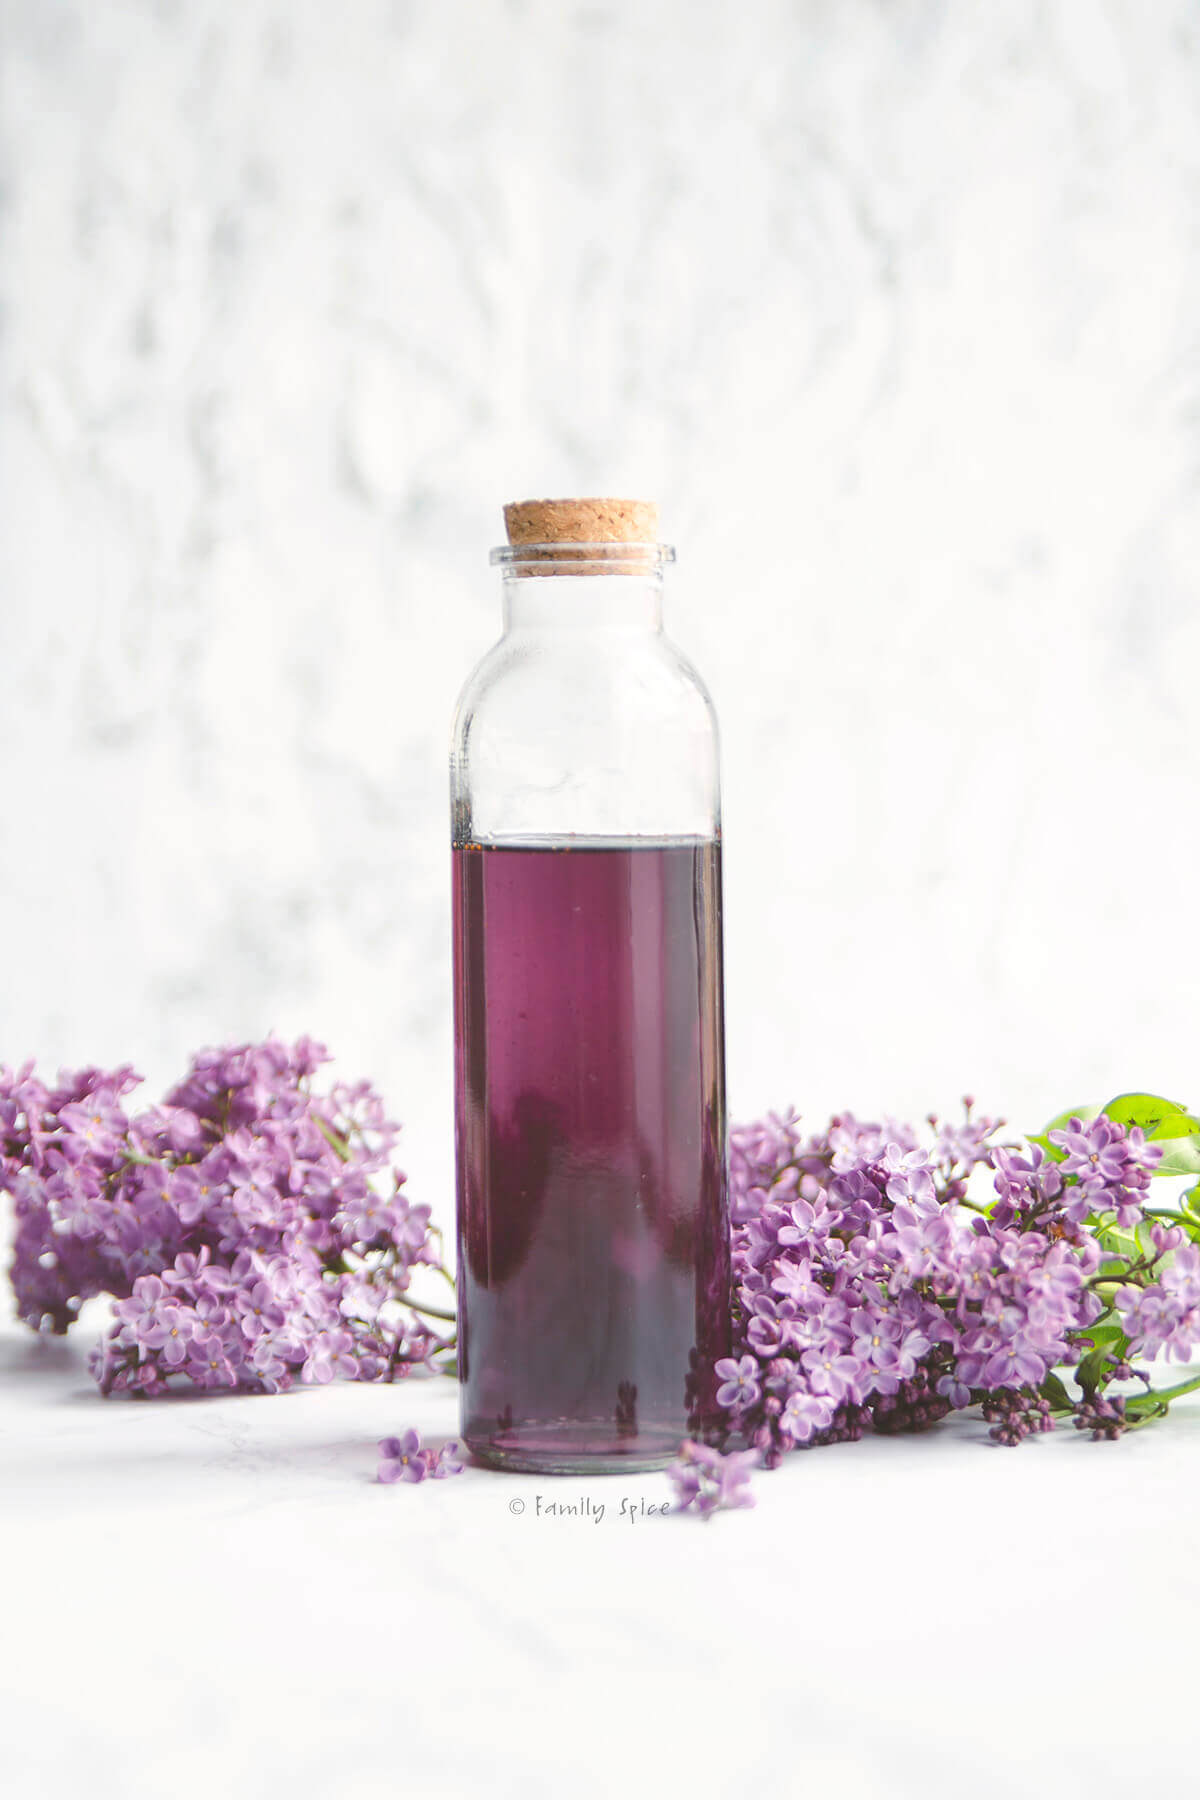 A bottle of lilac syrup with lilacs behind it